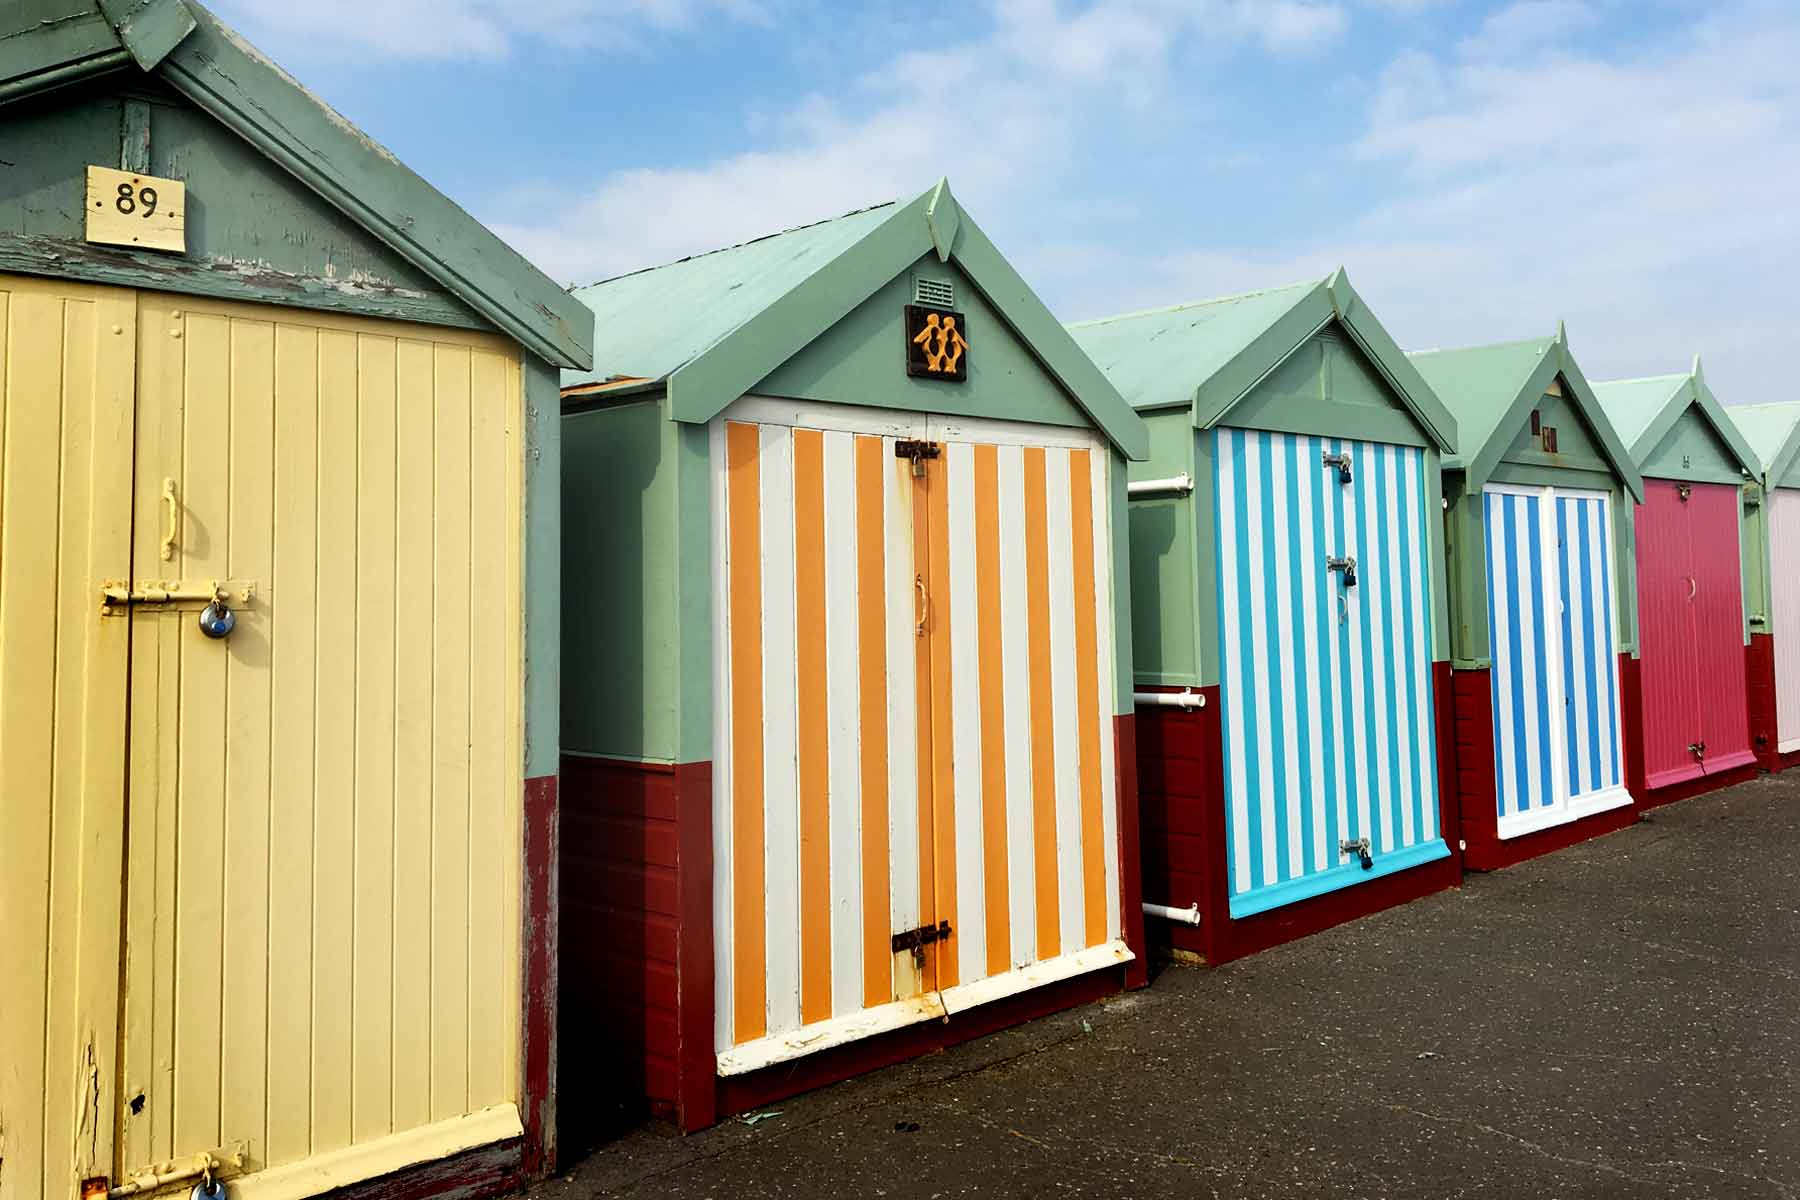 Hove Seafront bathing huts